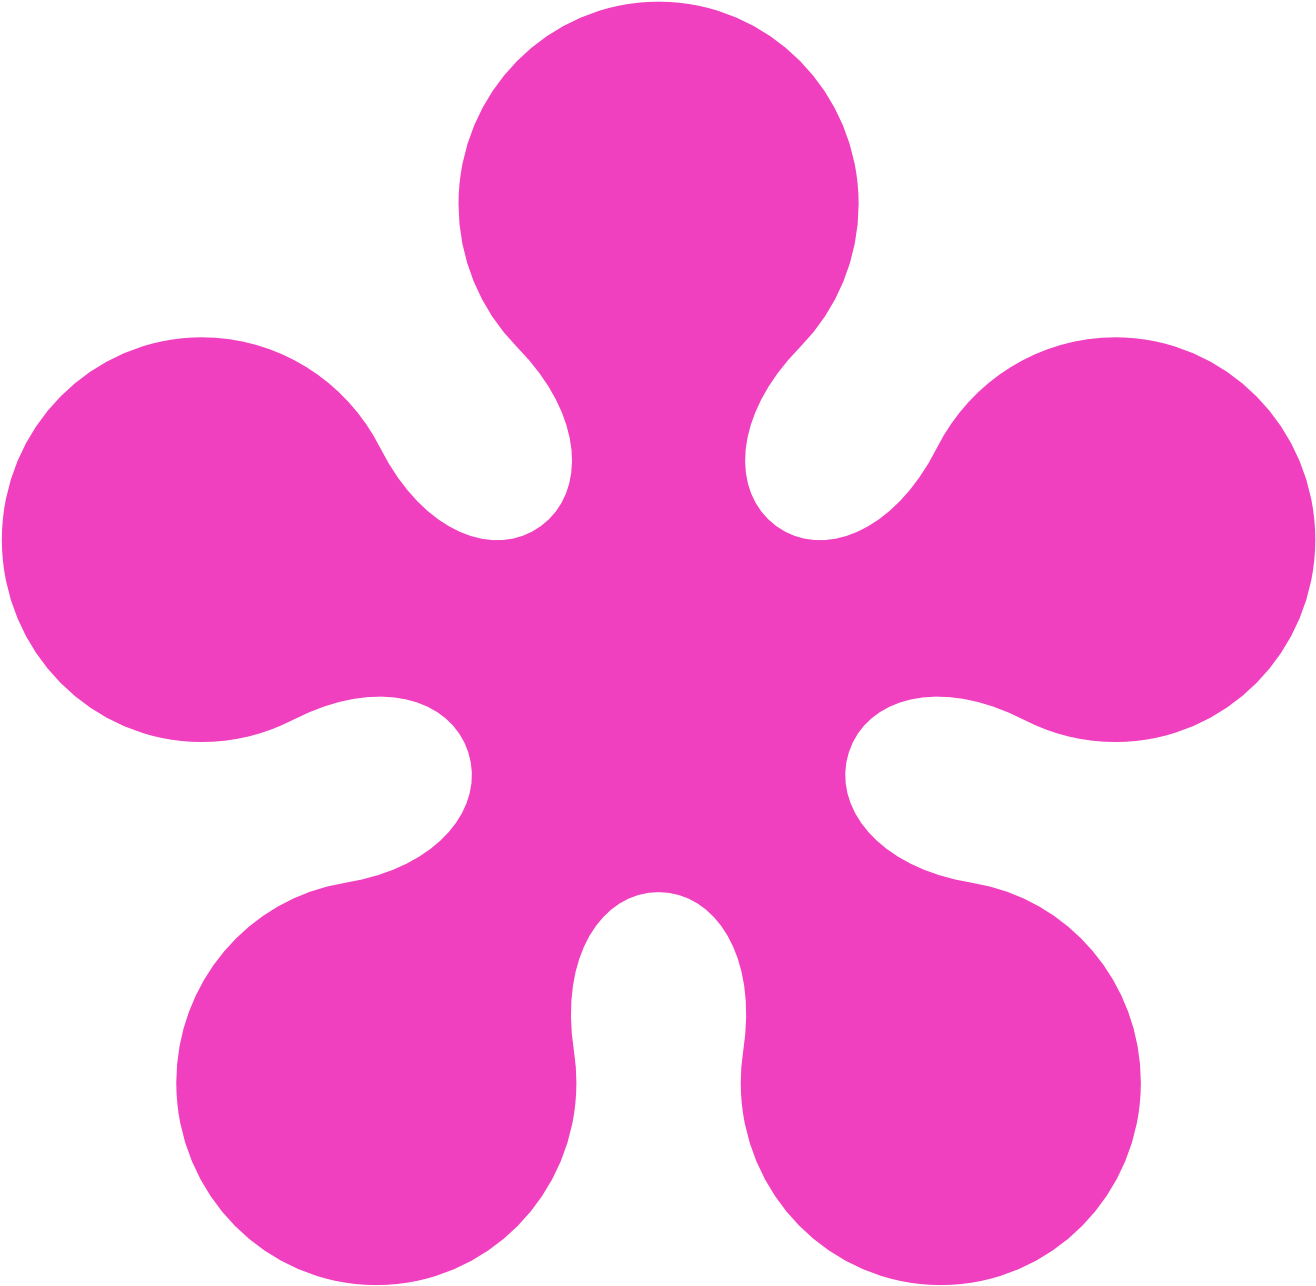 A Pink Flower With Black Background PNG